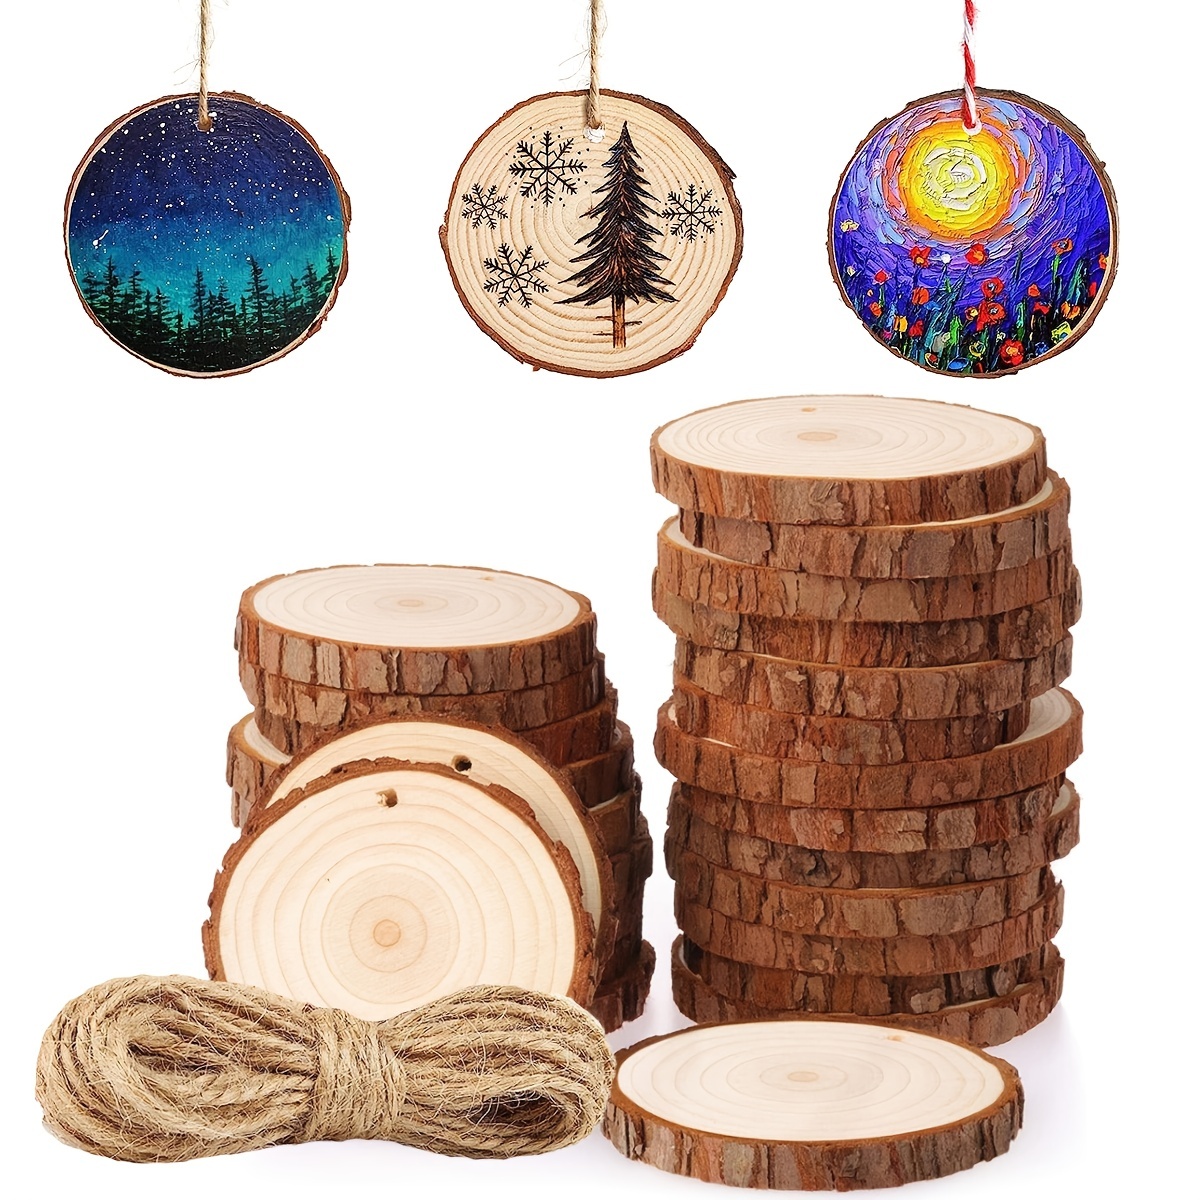 Wood Slices 32 Pcs 2.8-3.1 Inch, Natural Unfinished Wood Rounds Slice  Ornaments, Round Craft Wood Kit Predrilled Wood Circles for DIY Crafts  Christmas